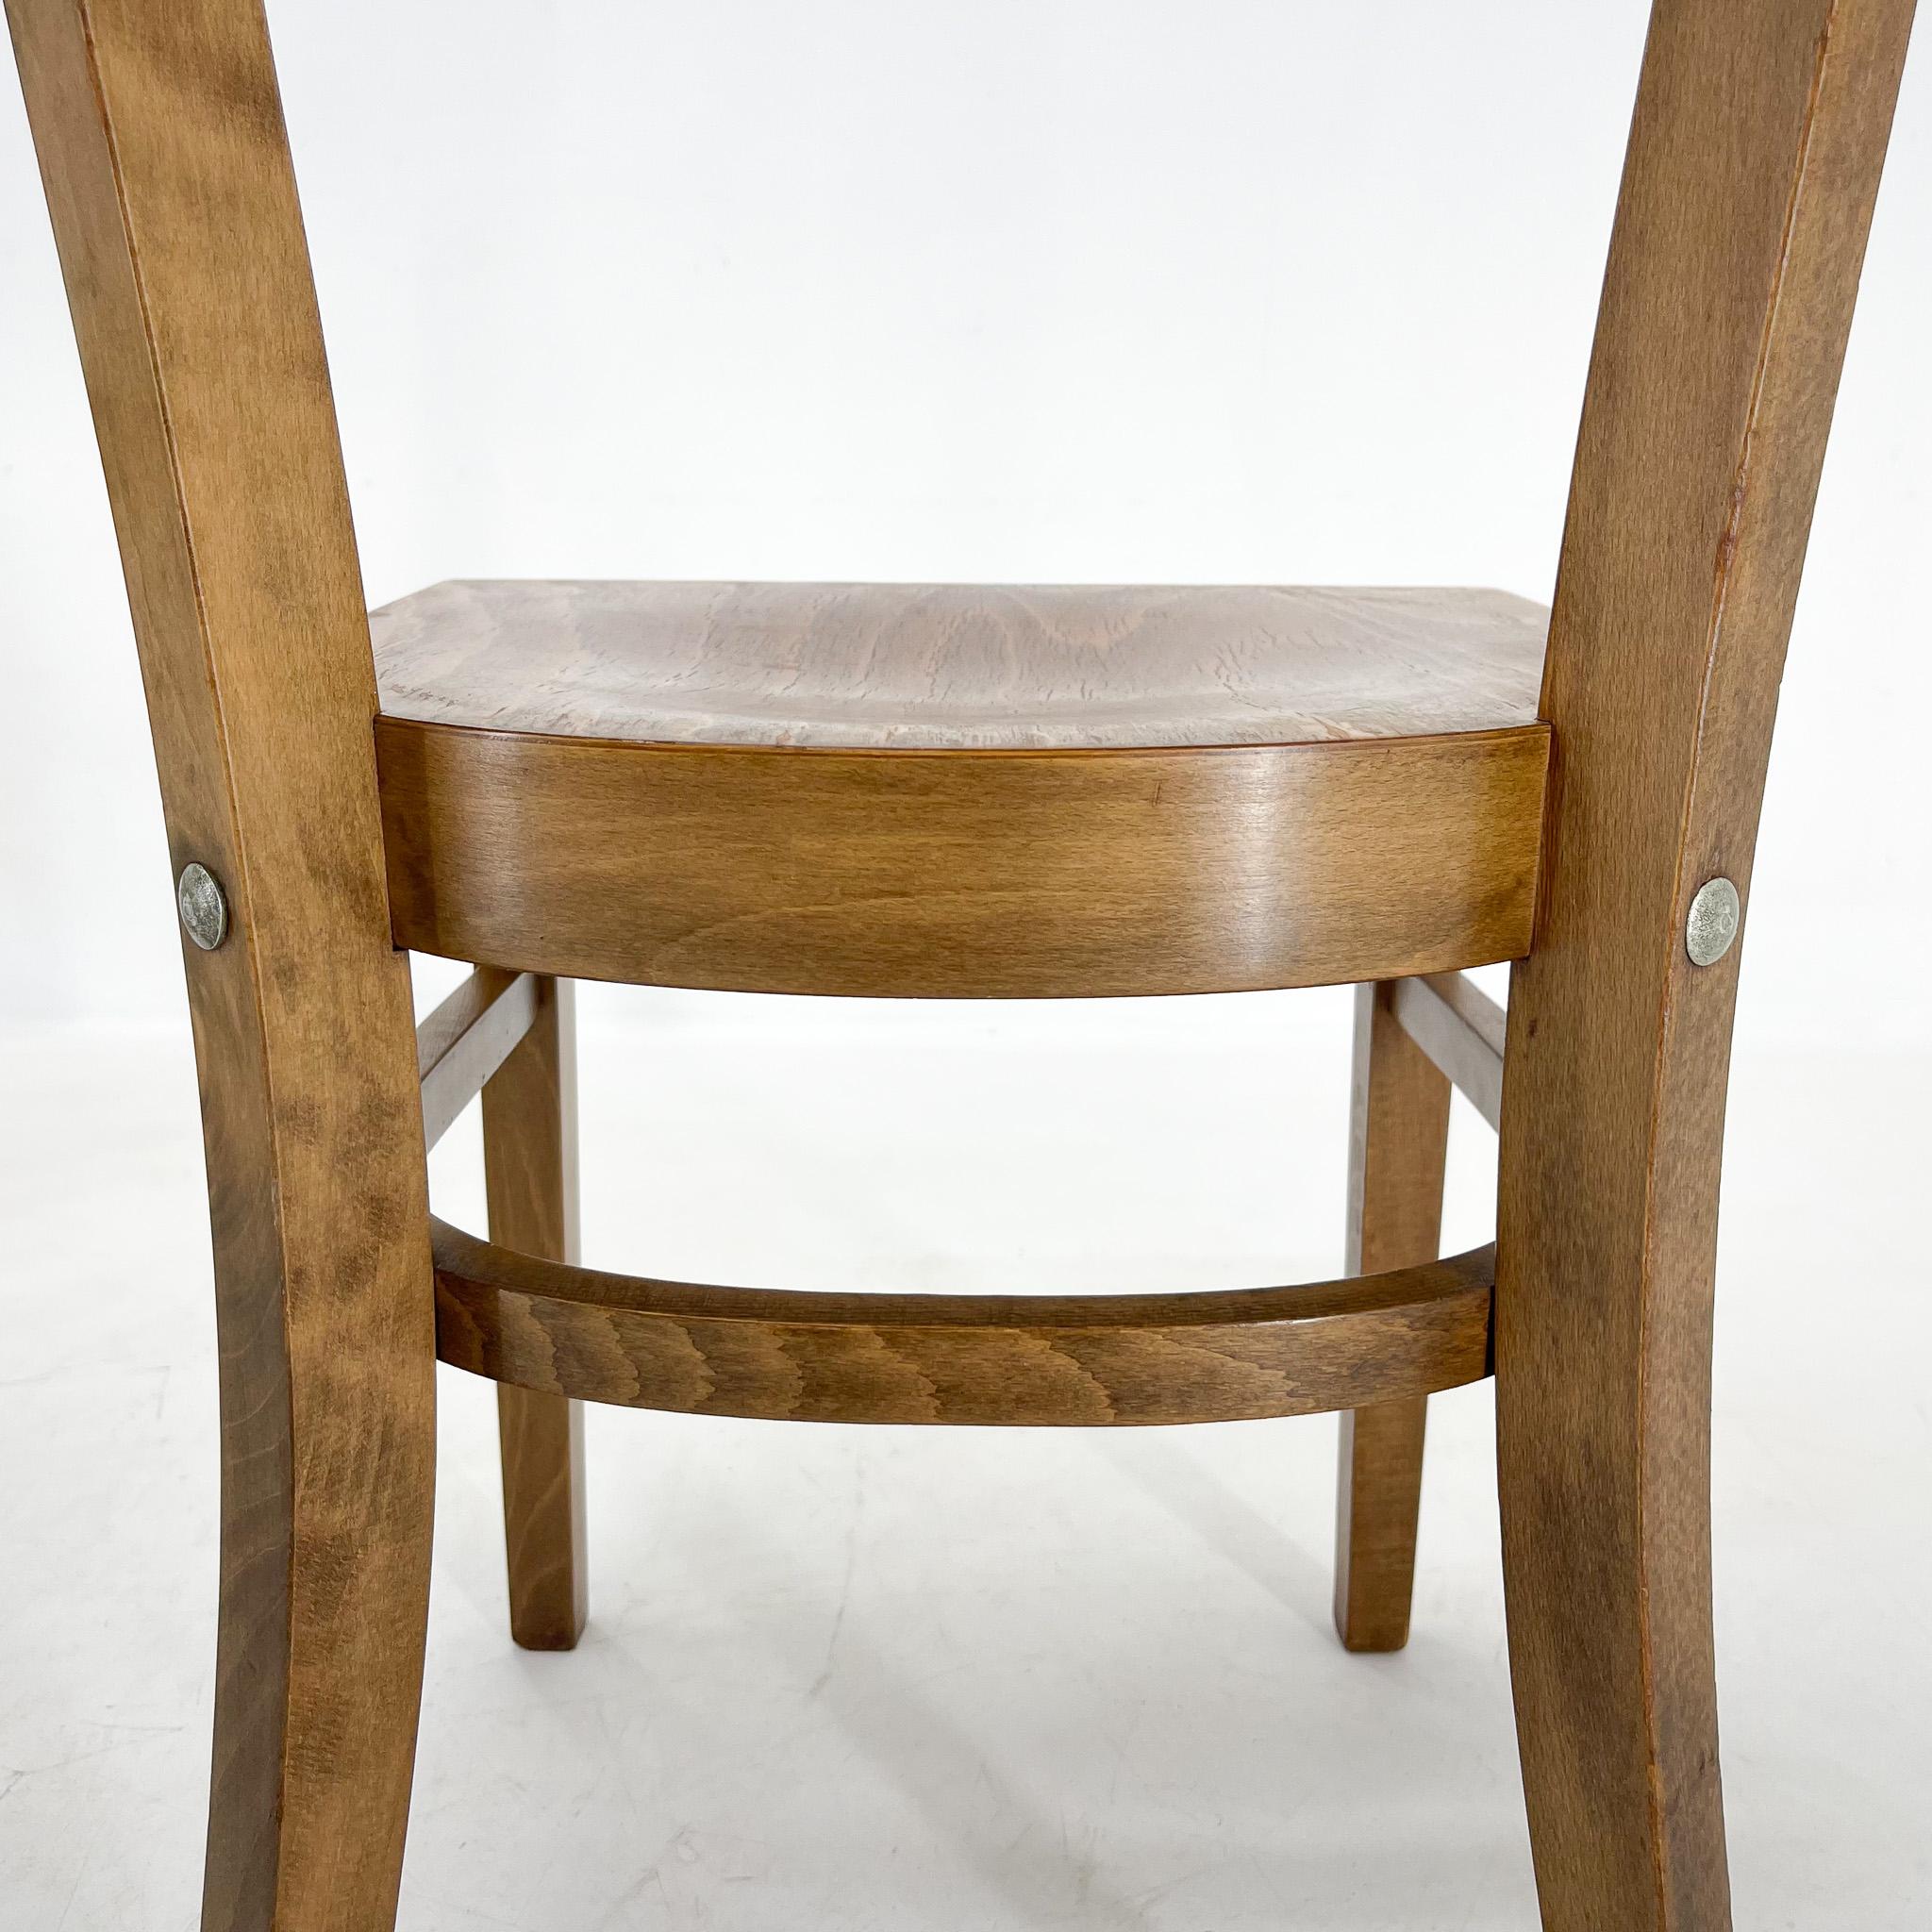 Set of Four Wooden Ton Chairs, Czechoslovakia, 1960s For Sale 2